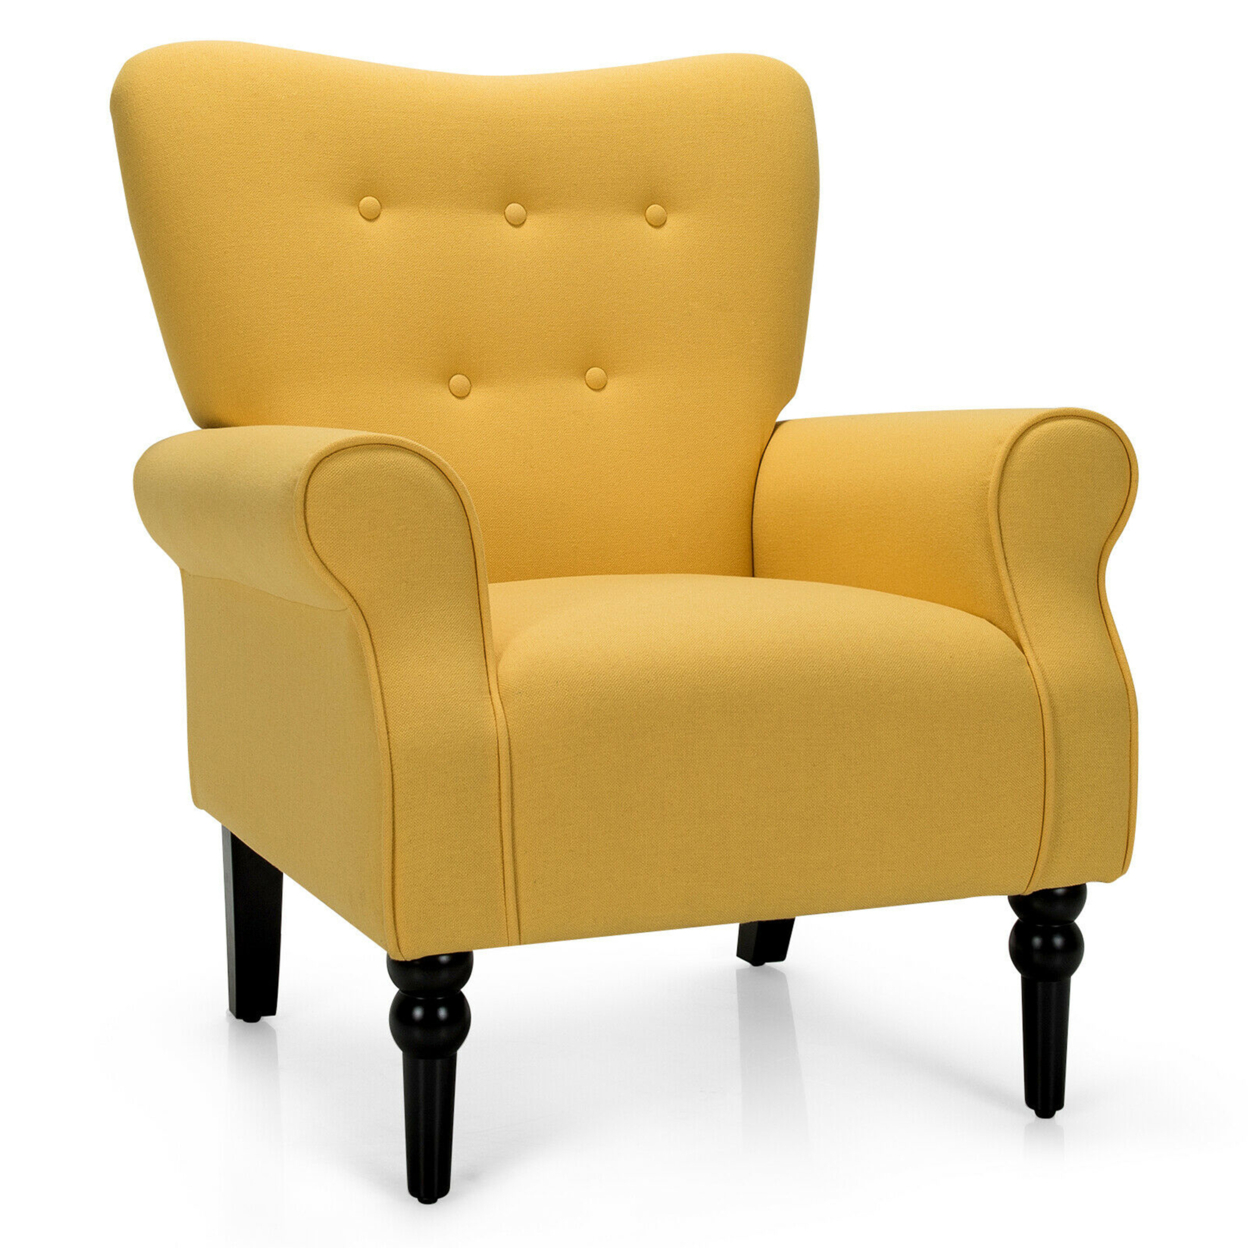 Modern Accent Chair W/ Tufted Backrest & Rubber Wood Legs - Yellow